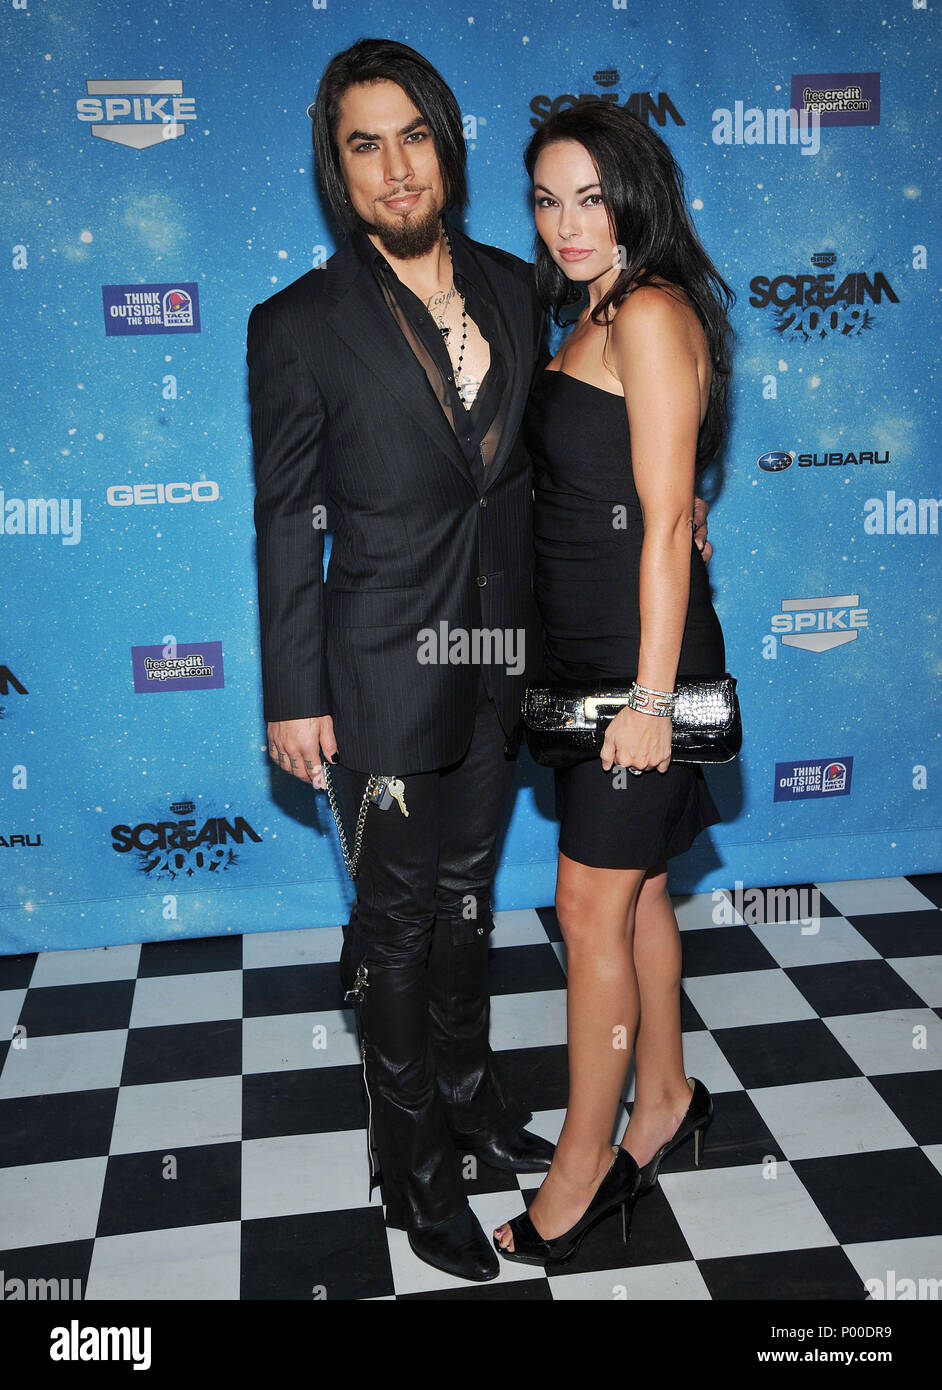 Dave Navarro - Scream Awards 2009 at the Greek Theatre In Los  AngelesNavarroDave 19 Event in Hollywood Life - California, Red Carpet  Event, USA, Film Industry, Celebrities, Photography, Bestof, Arts Culture  and